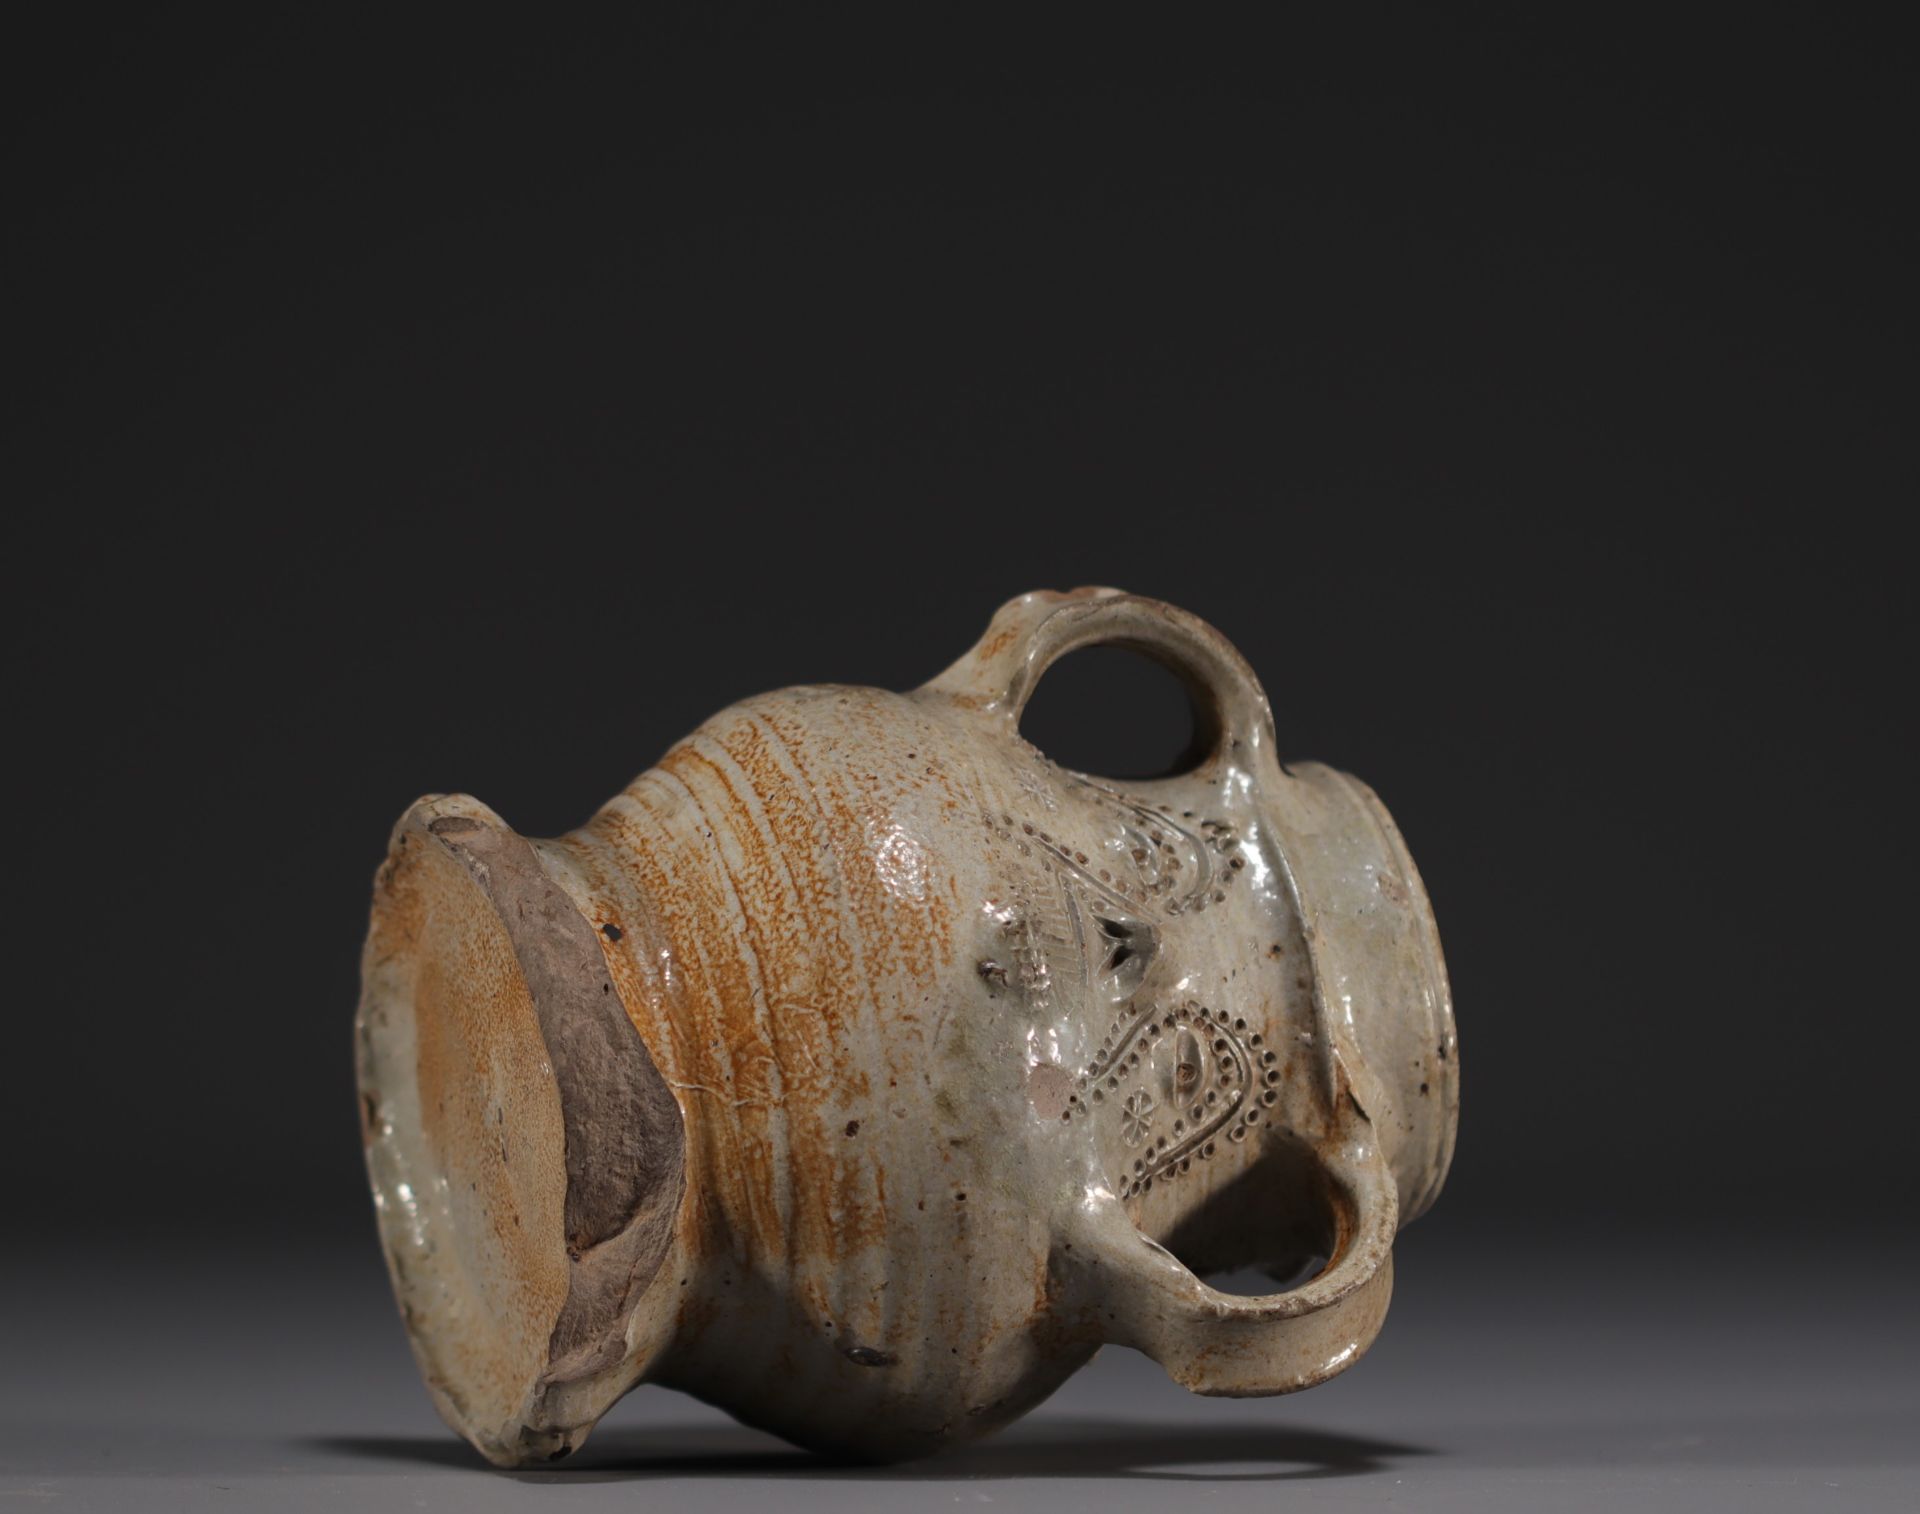 Raeren - Rare stoneware jug decorated with faces, salt glaze, early 16th century. - Image 4 of 5